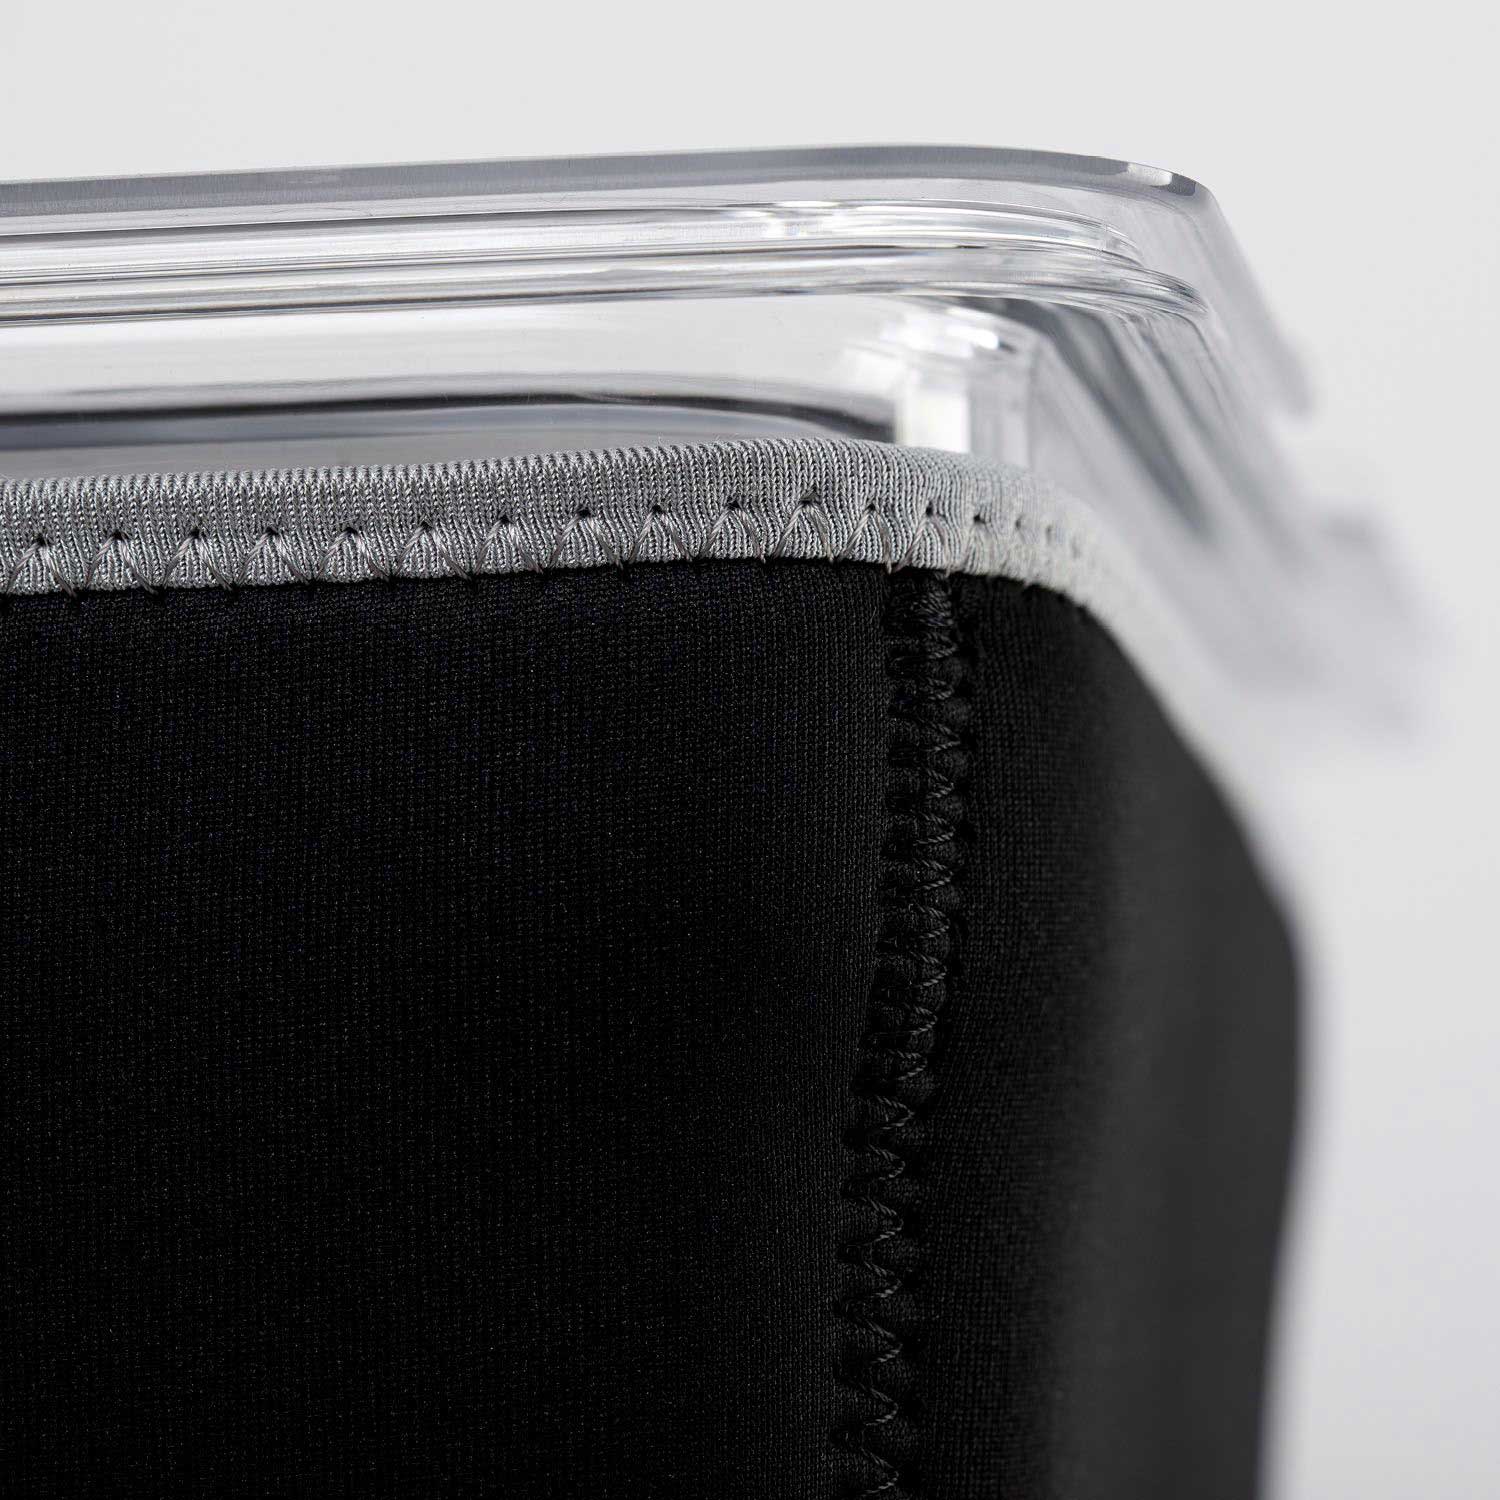 Detail of the sous-vide insulation sleeve